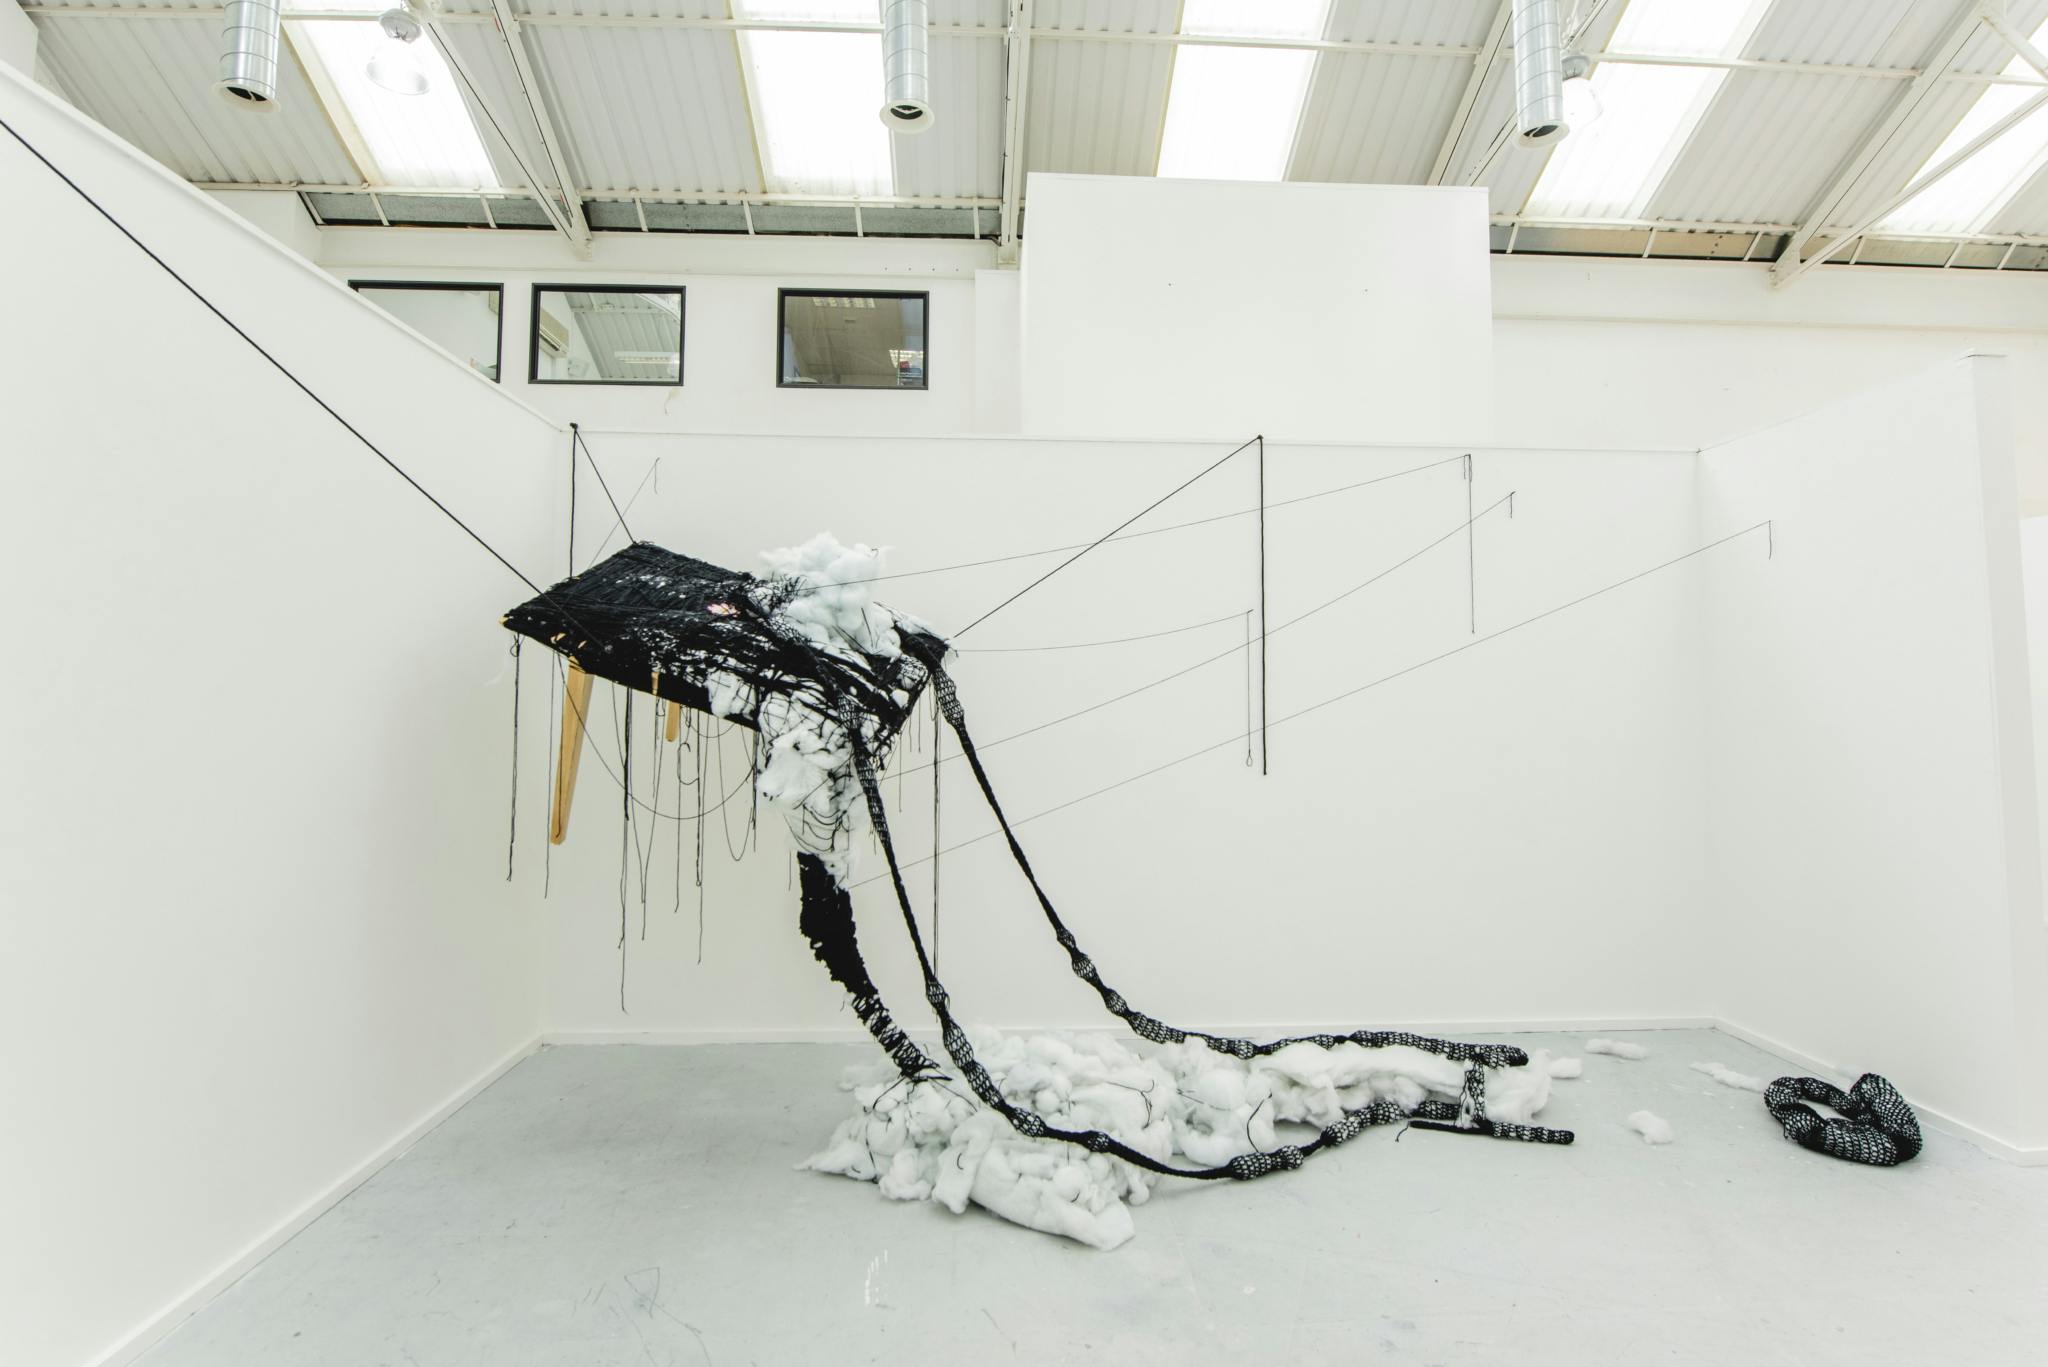 Image shows an art installation made up of a table, black wool, stuffing and thread